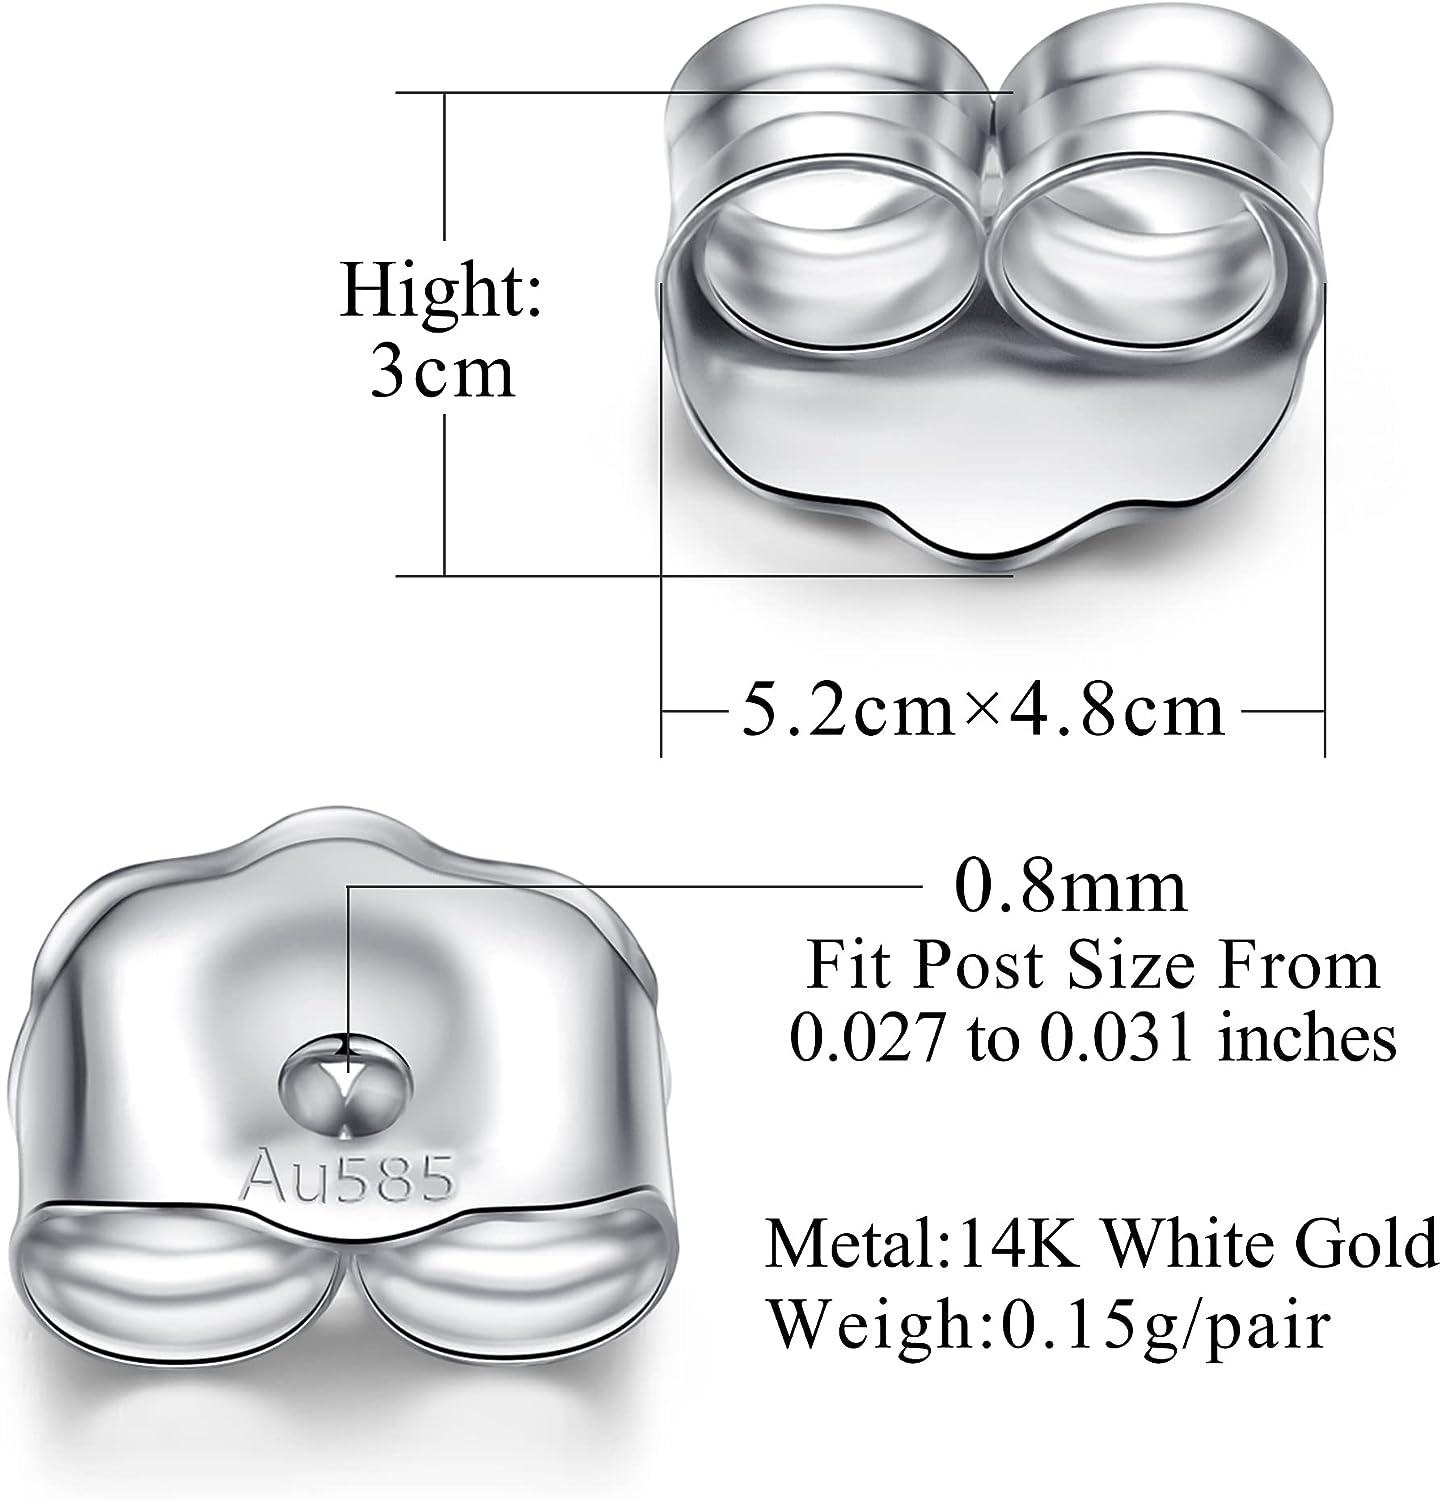  Gold Earring Backs, Earring Backs Gold Hypoallergenic  Replacements for Stud White Gold Silver Locking Silver Flat Earrings Backs